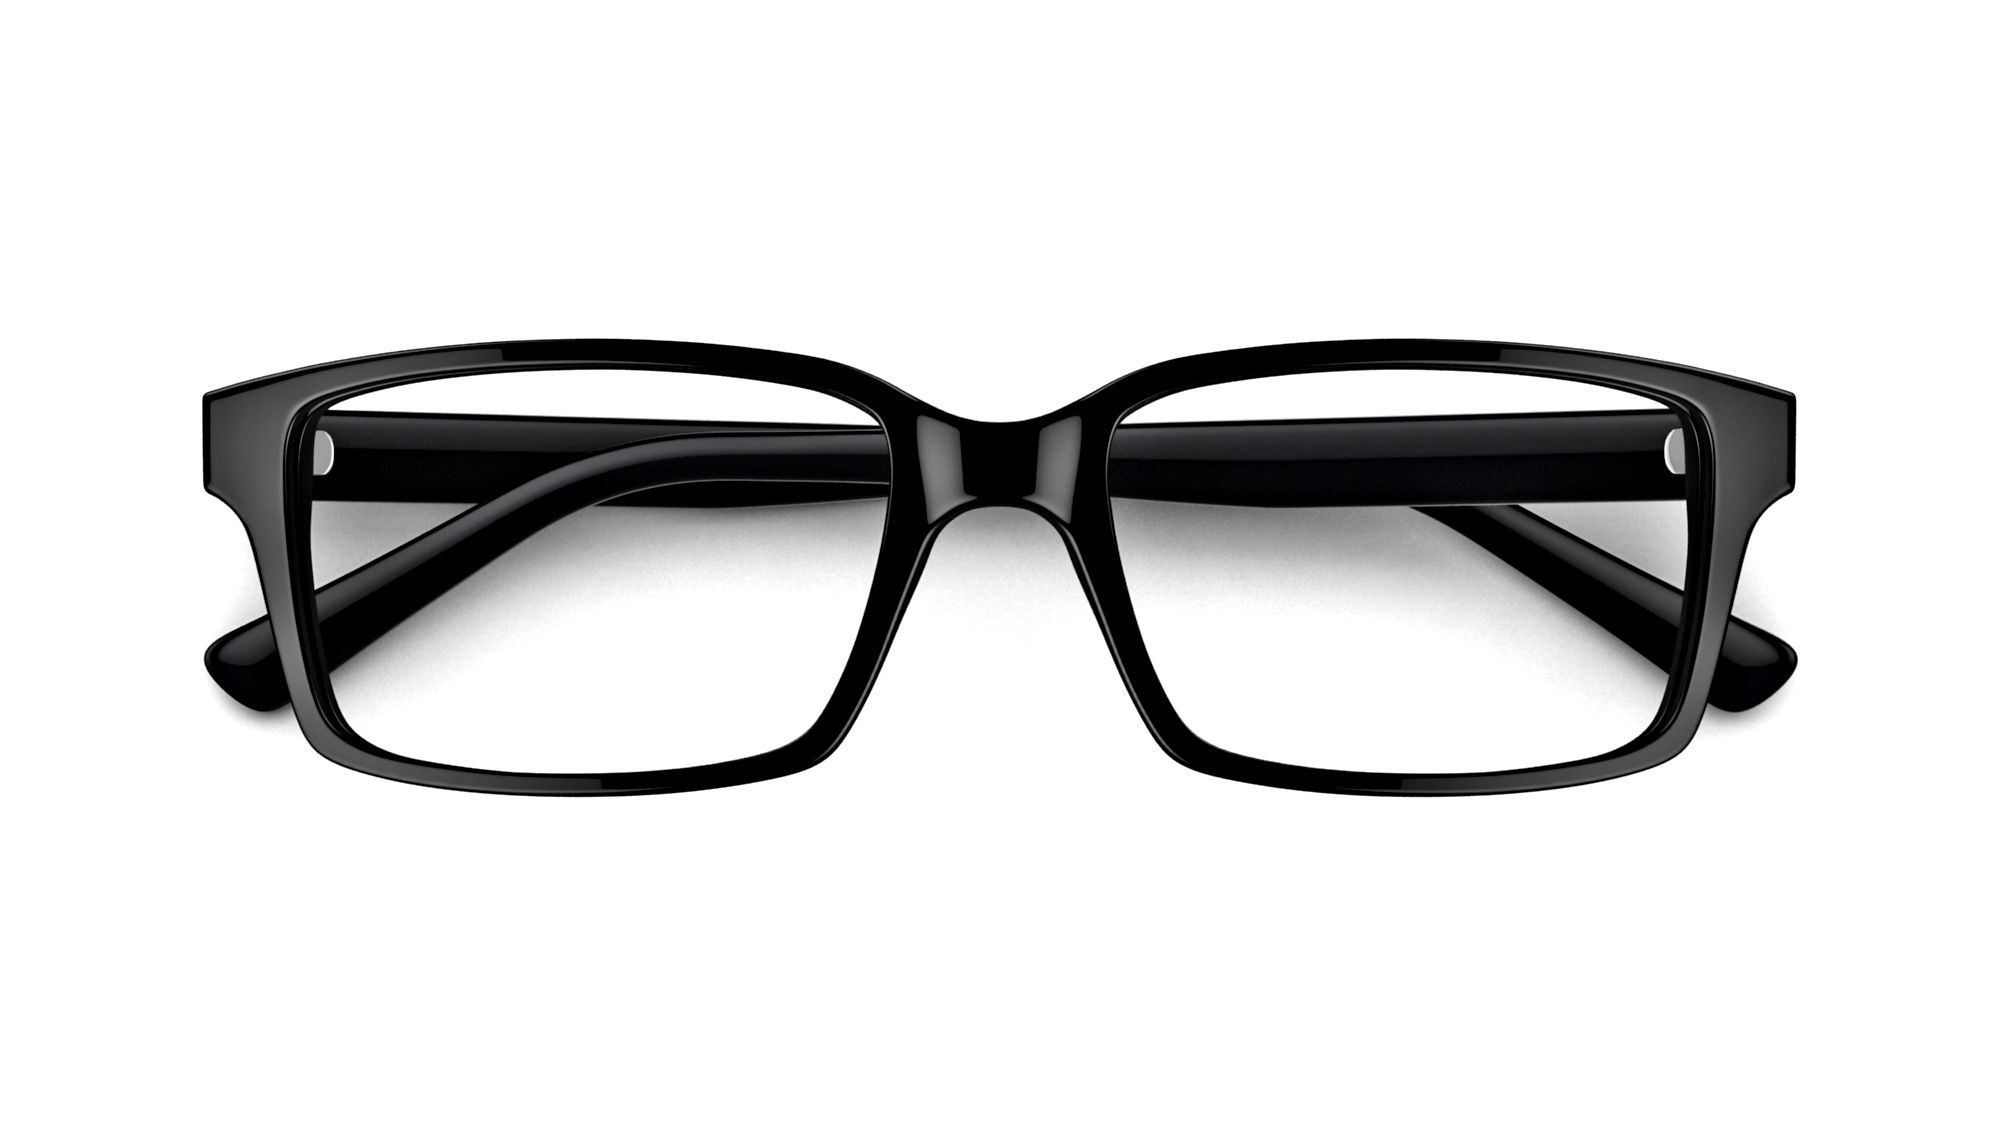 See The World In High Definition With Specsavers' Superior Eyewear Options